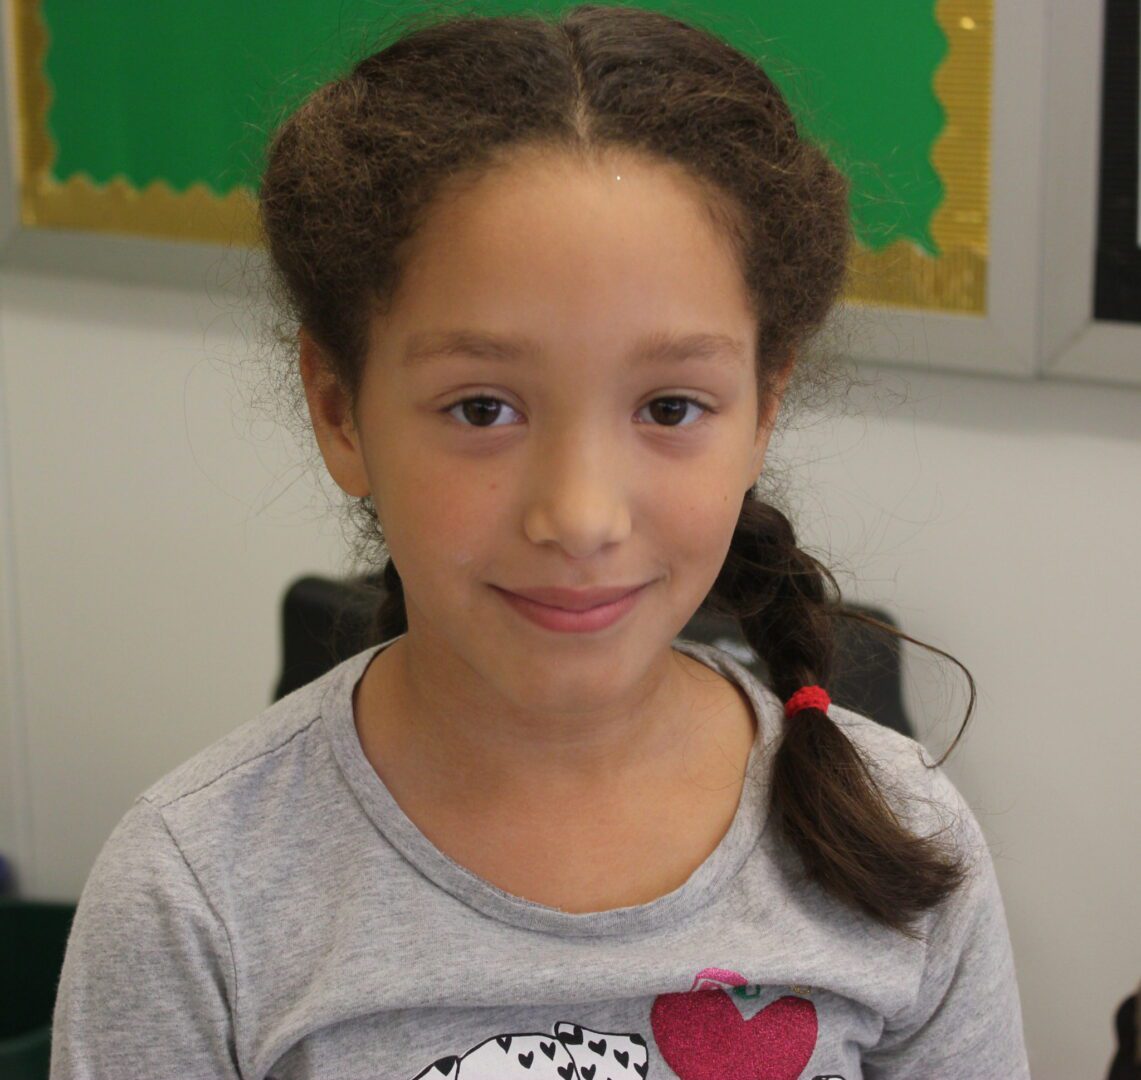 A young girl wearing a tee shirt with a heart on it.